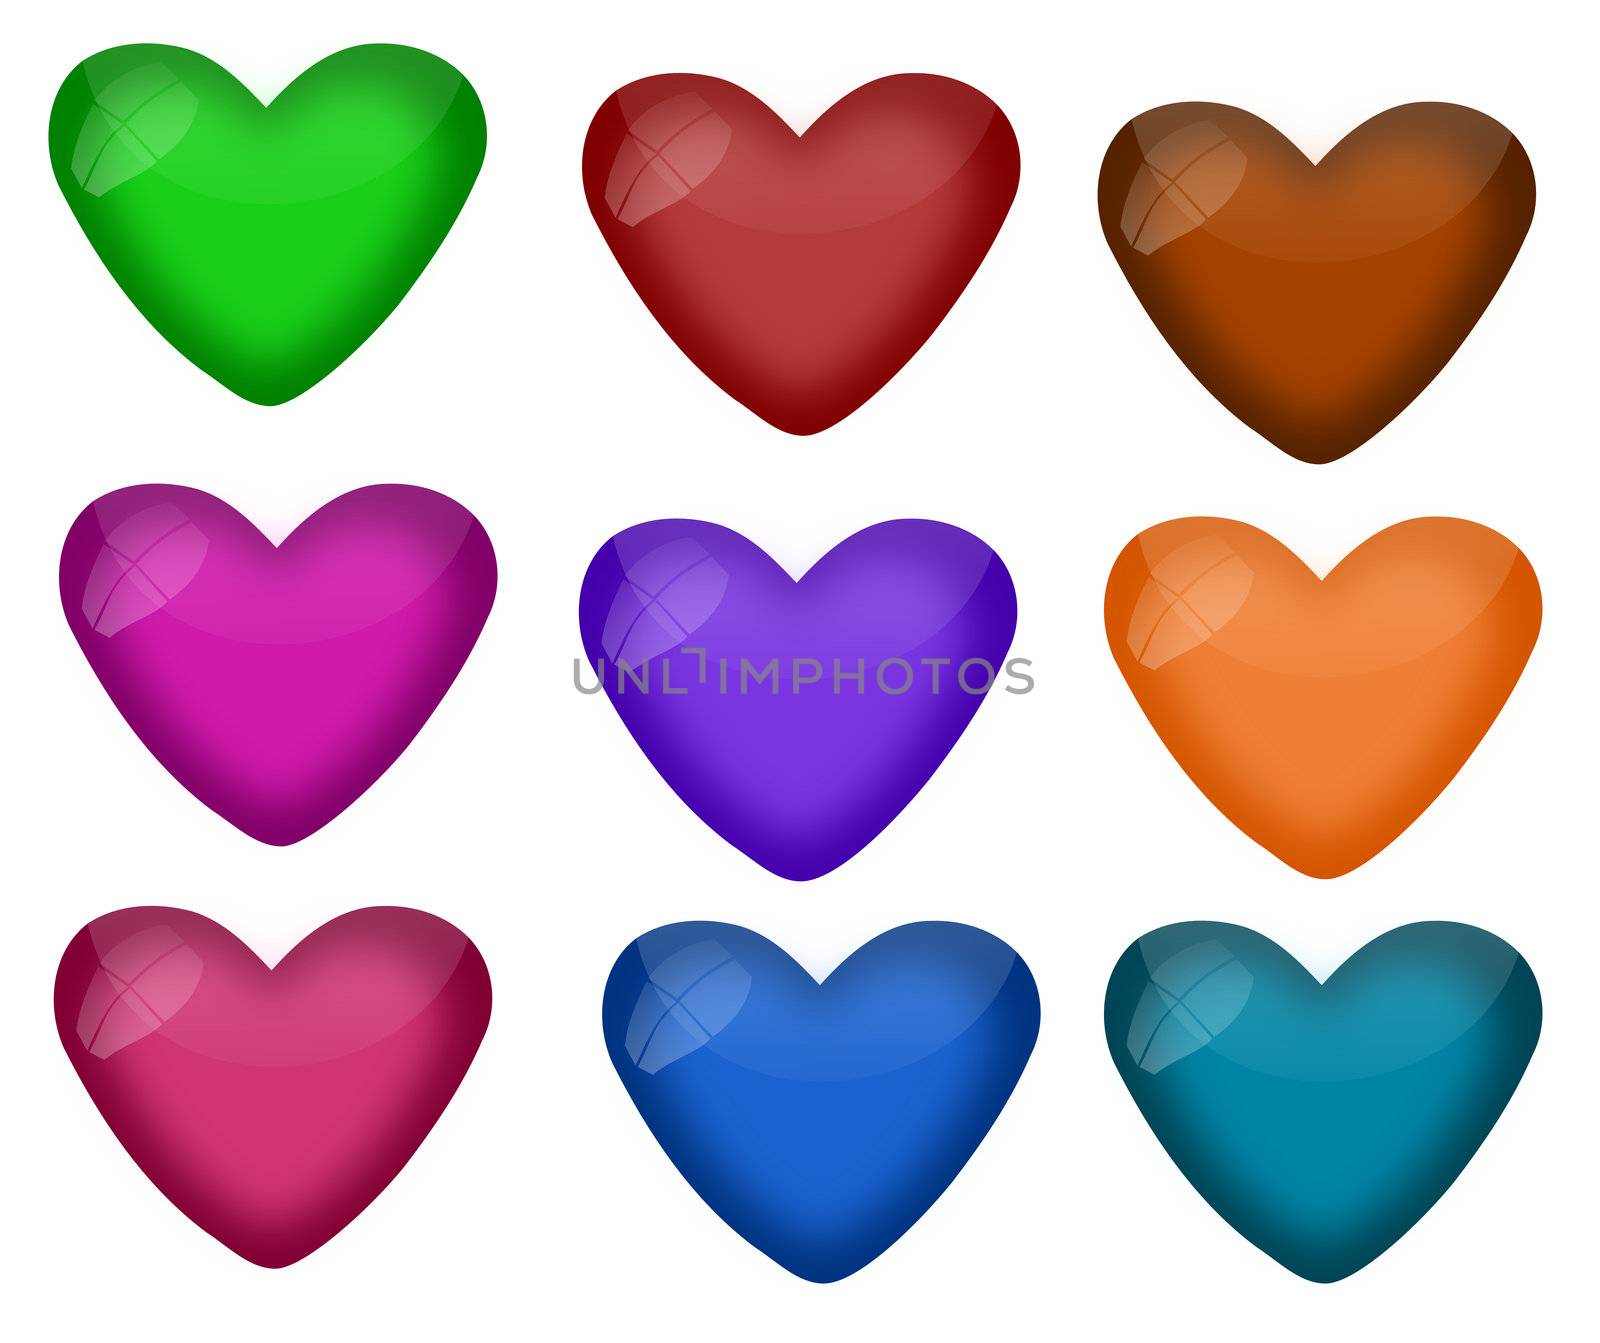 A collection of shiny and reflective hearts in nine different colors